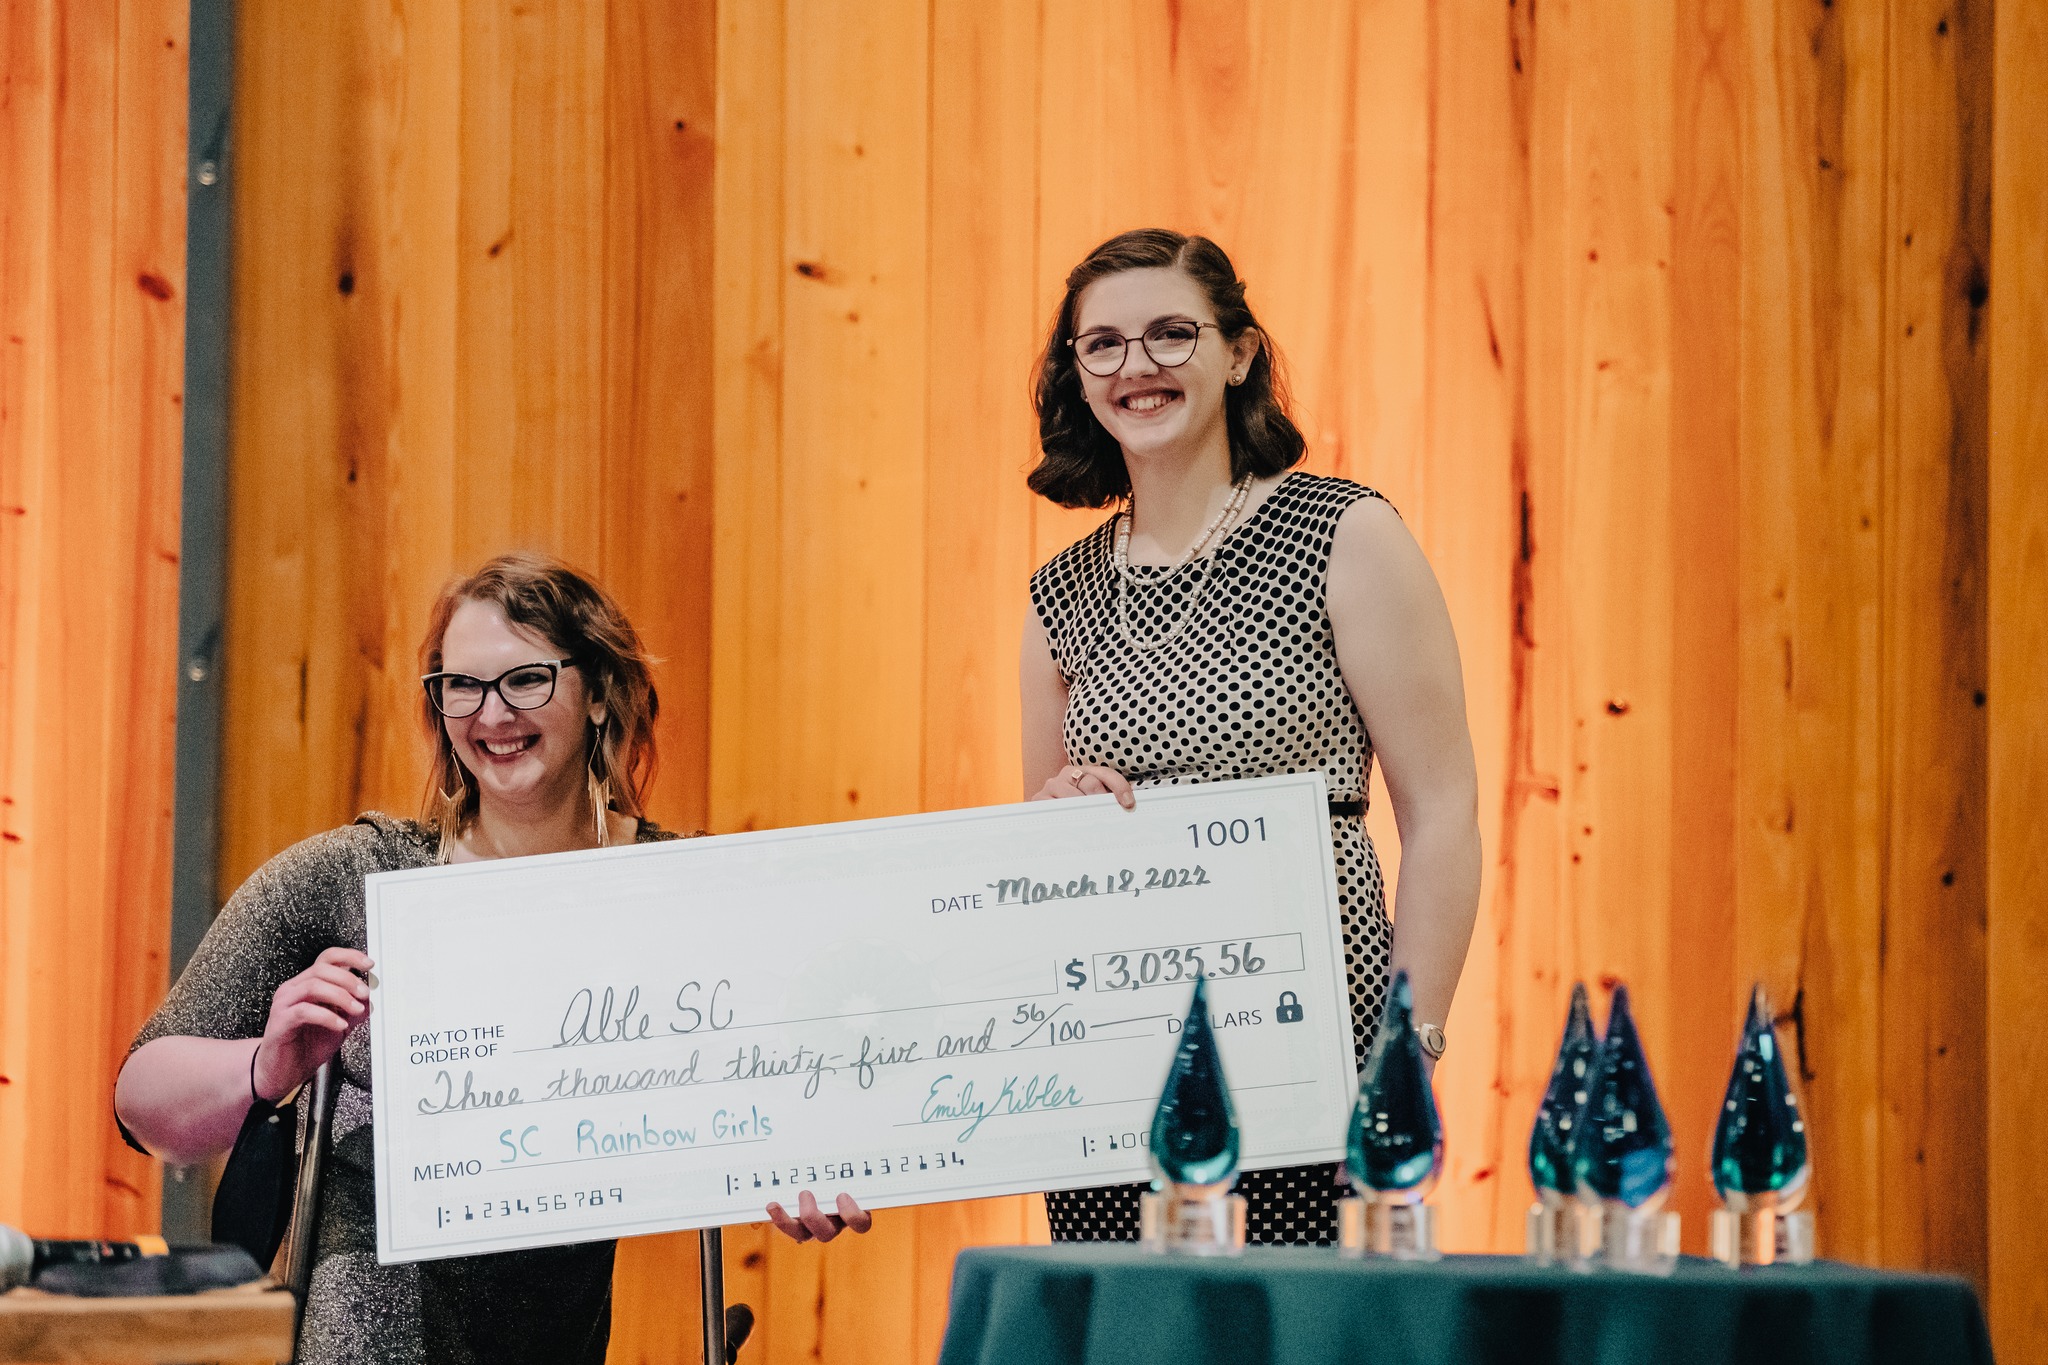 Photo of Kimberly, Able SC's CEO, holding a large check with special guest and fundraiser, Emily. They are standing on the stage and smiling towards the crowd.